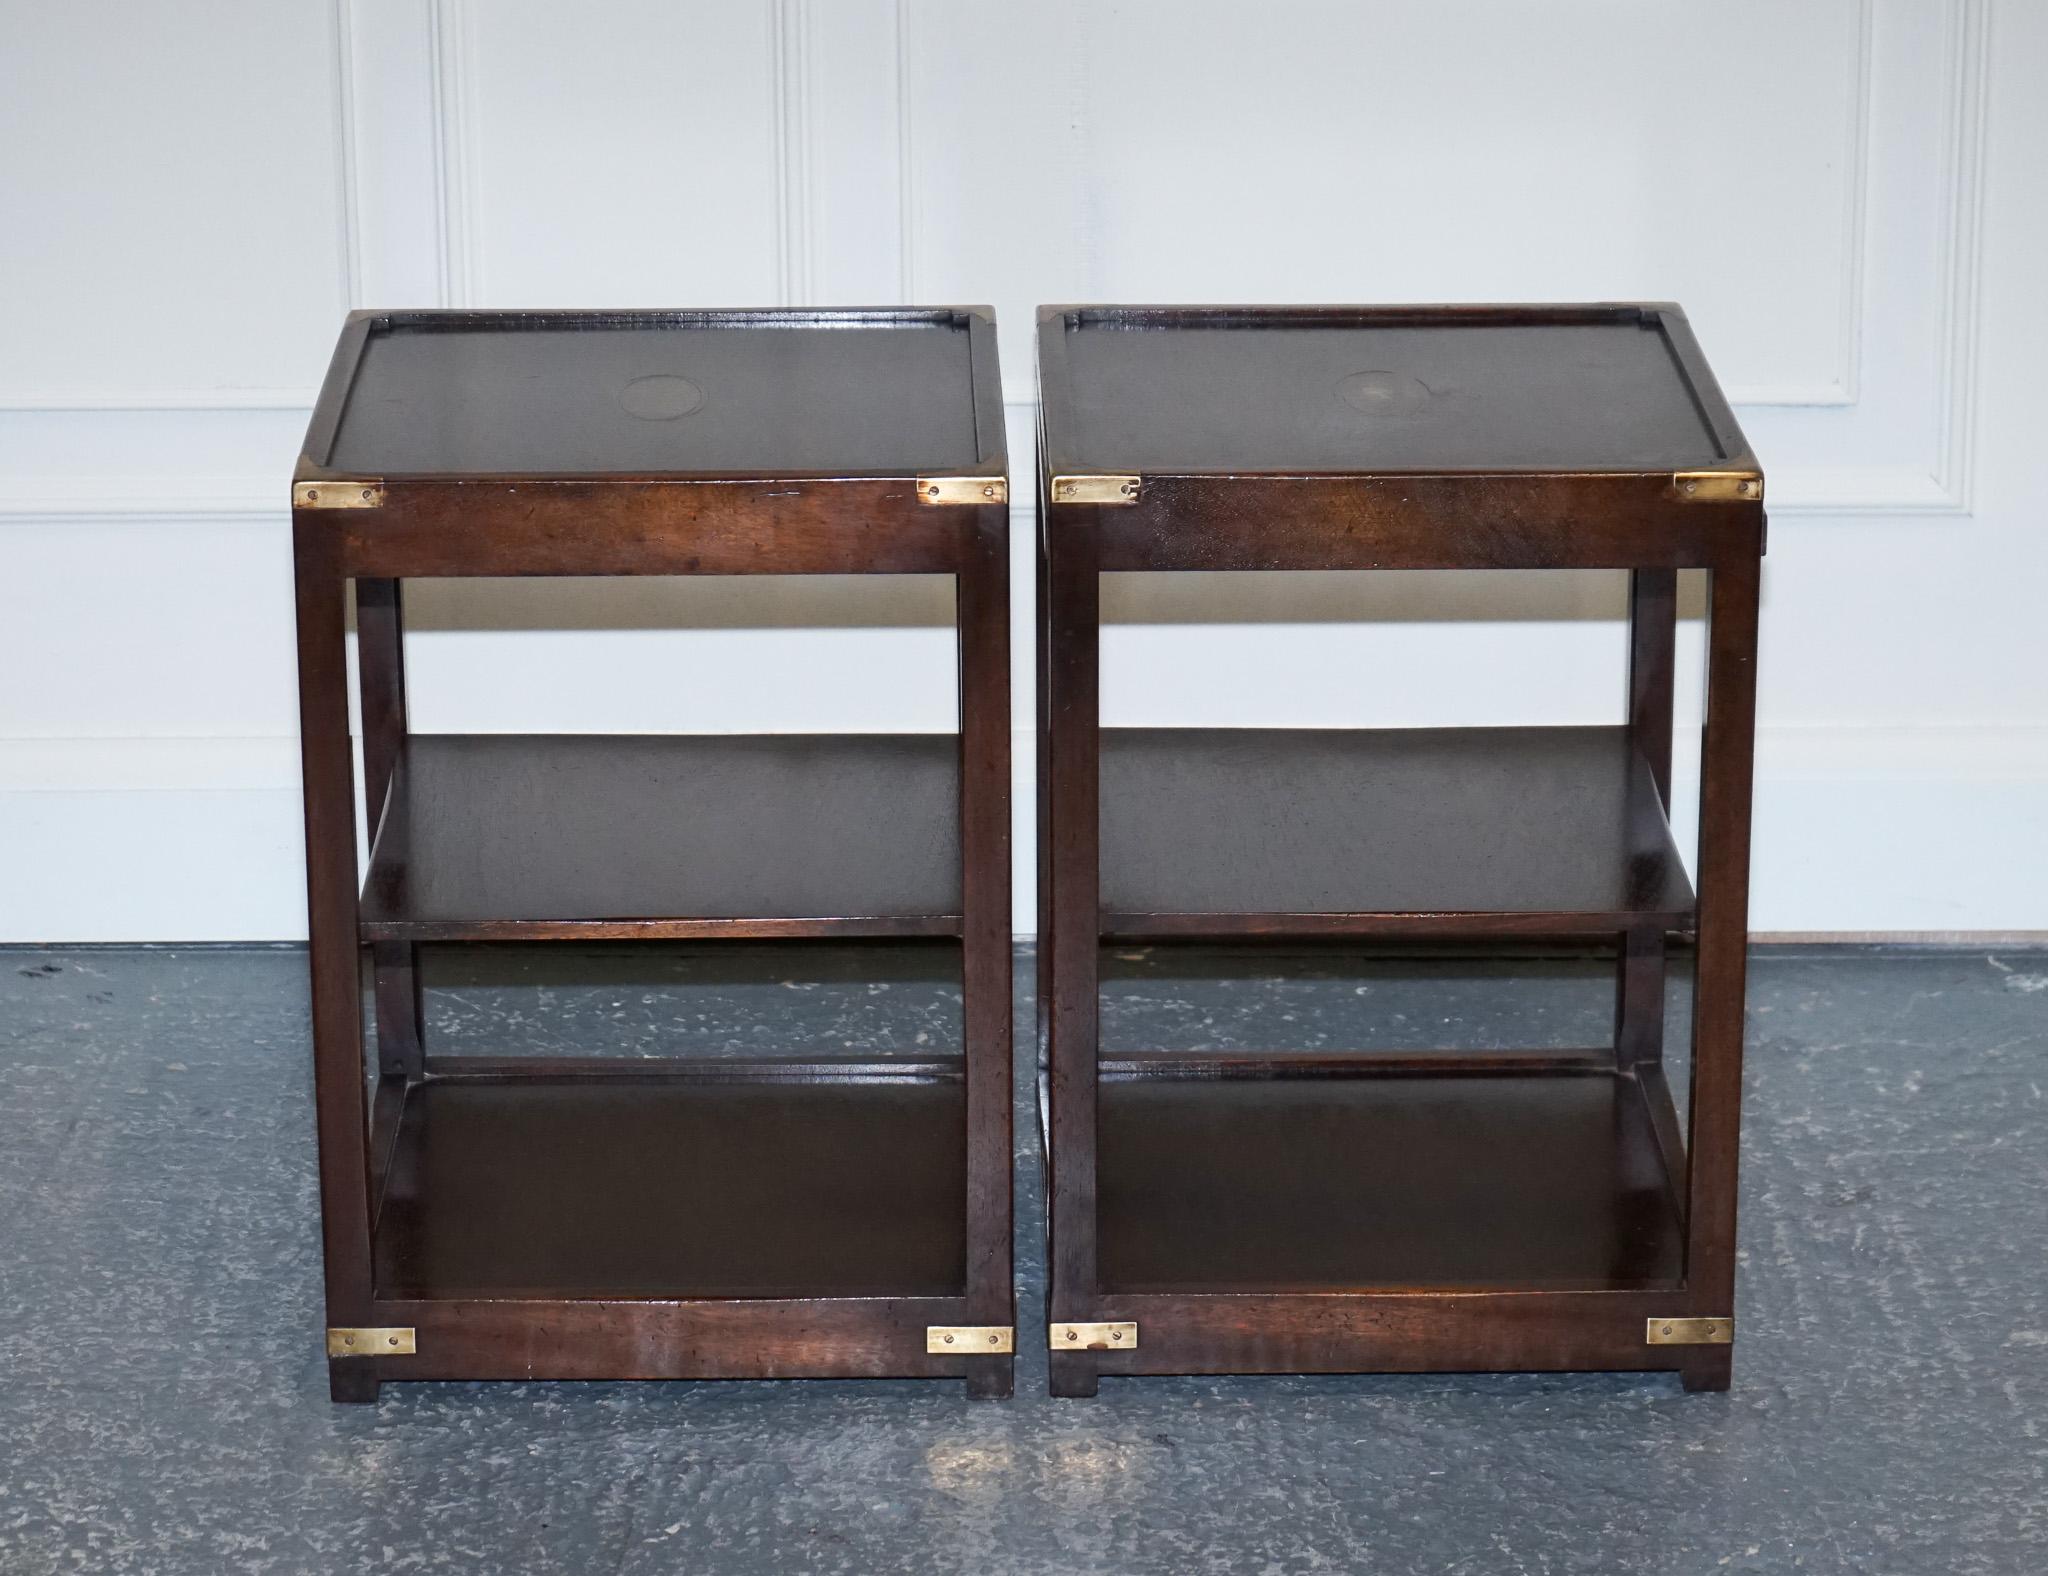 British RESTORED PAiR OF HARRODS KENNEDY DOUBLE SIDED CAMPAIGN SIDE TABLES BUTLER TRAYS 